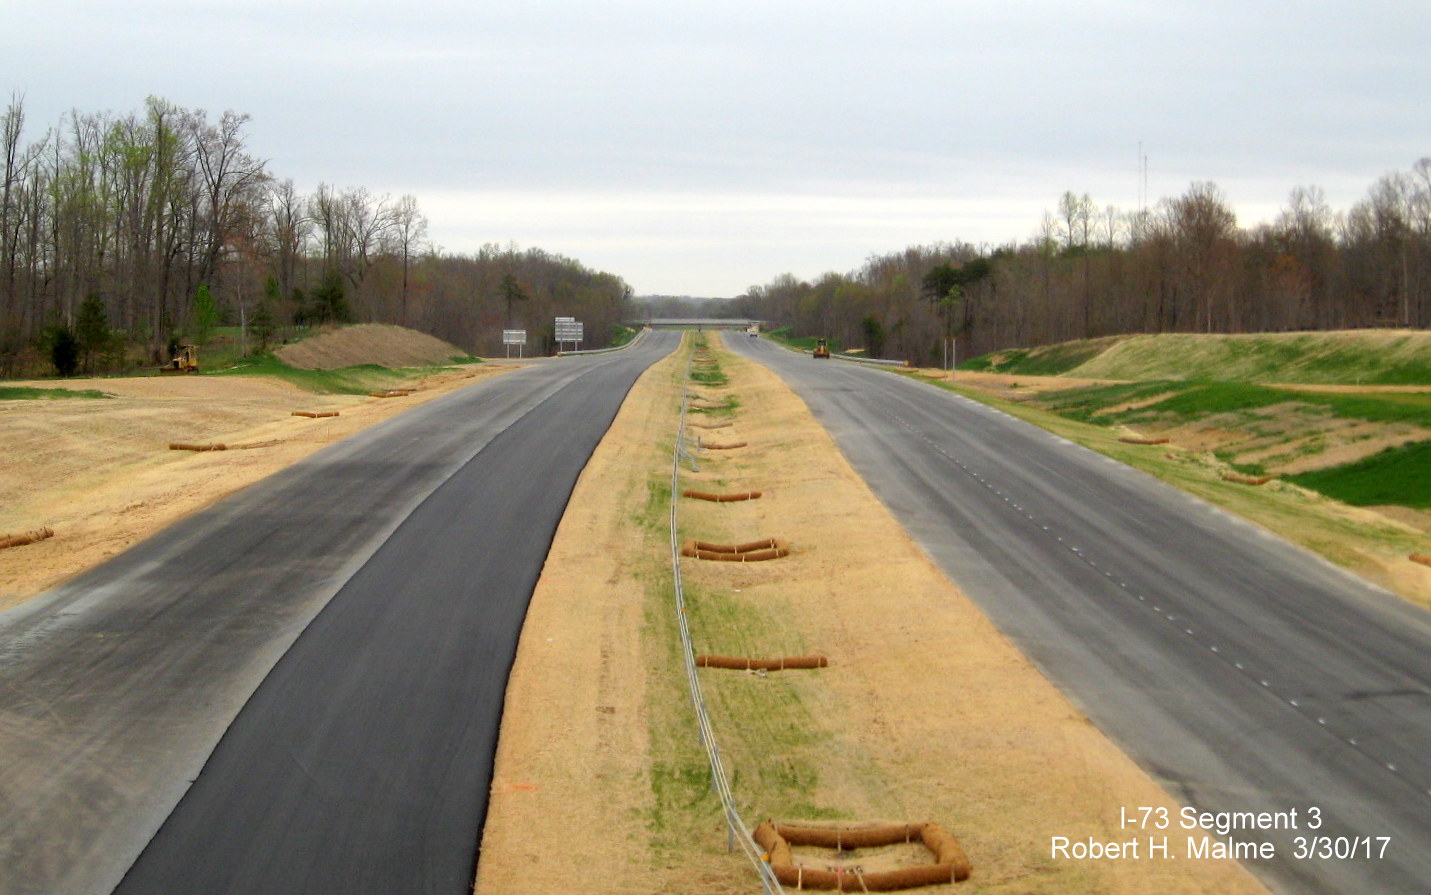 Image taken of view north from NC 150 bridge over future I-73 lanes under construction in Summerfield, Guilford County